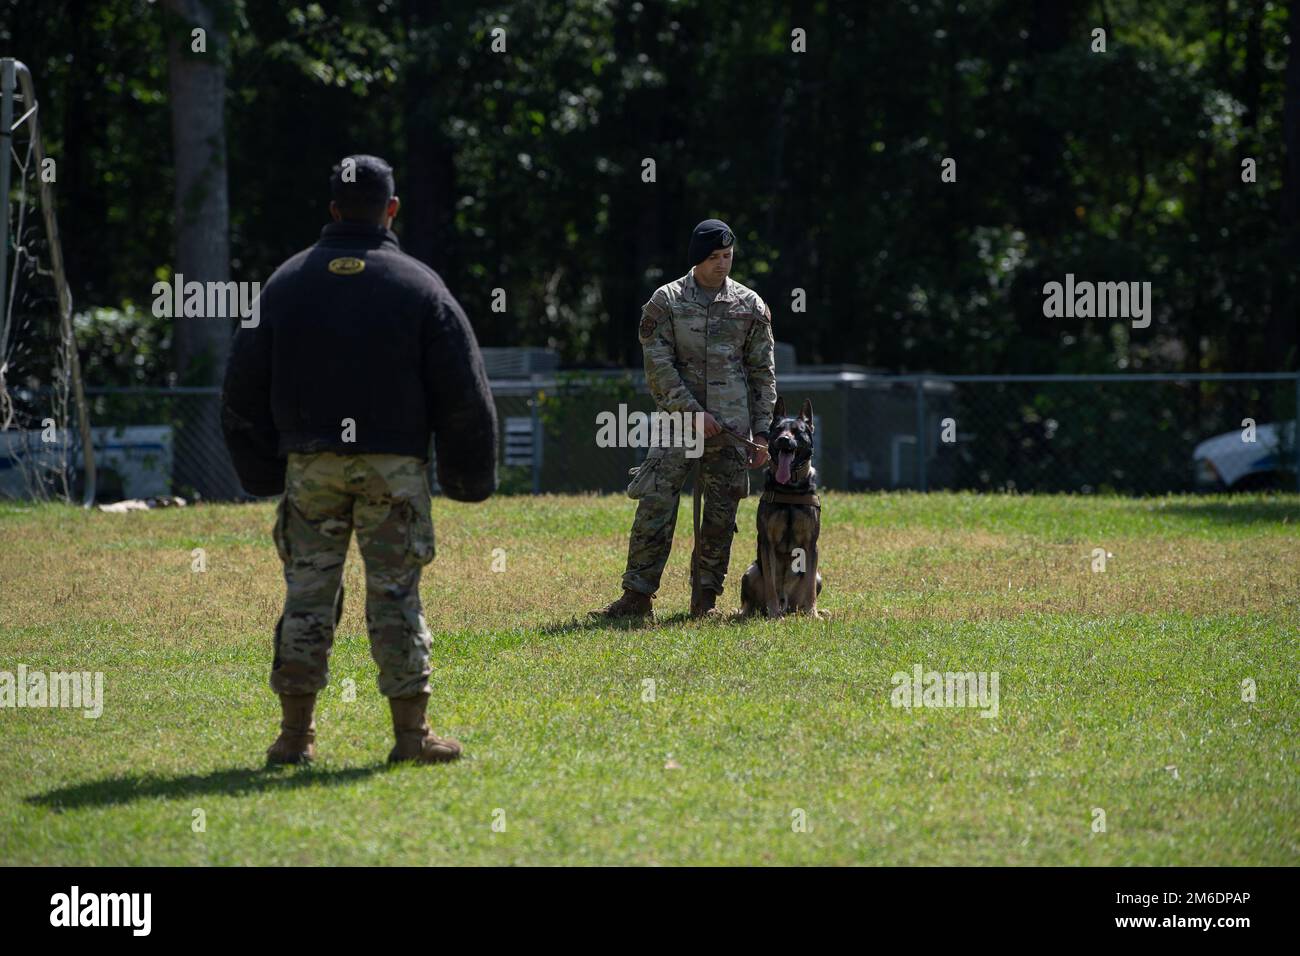 U.S. Air Force Senior Airman Brady Sloup, right, and Senior Airman Joshua Thompson, 23rd Security Forces Squadron military working dog handlers, display a training technique during a K-9 demonstration at St. John the Evangelist Catholic School, Valdosta, Georgia, April 25, 2022. Thompson is wearing a bite suit to eliminate the impact of the dog’s bite. To highlight Month of the Military Child, the St. John faculty hosted the K-9 demo to show appreciation for the military students and their classmates. Stock Photo